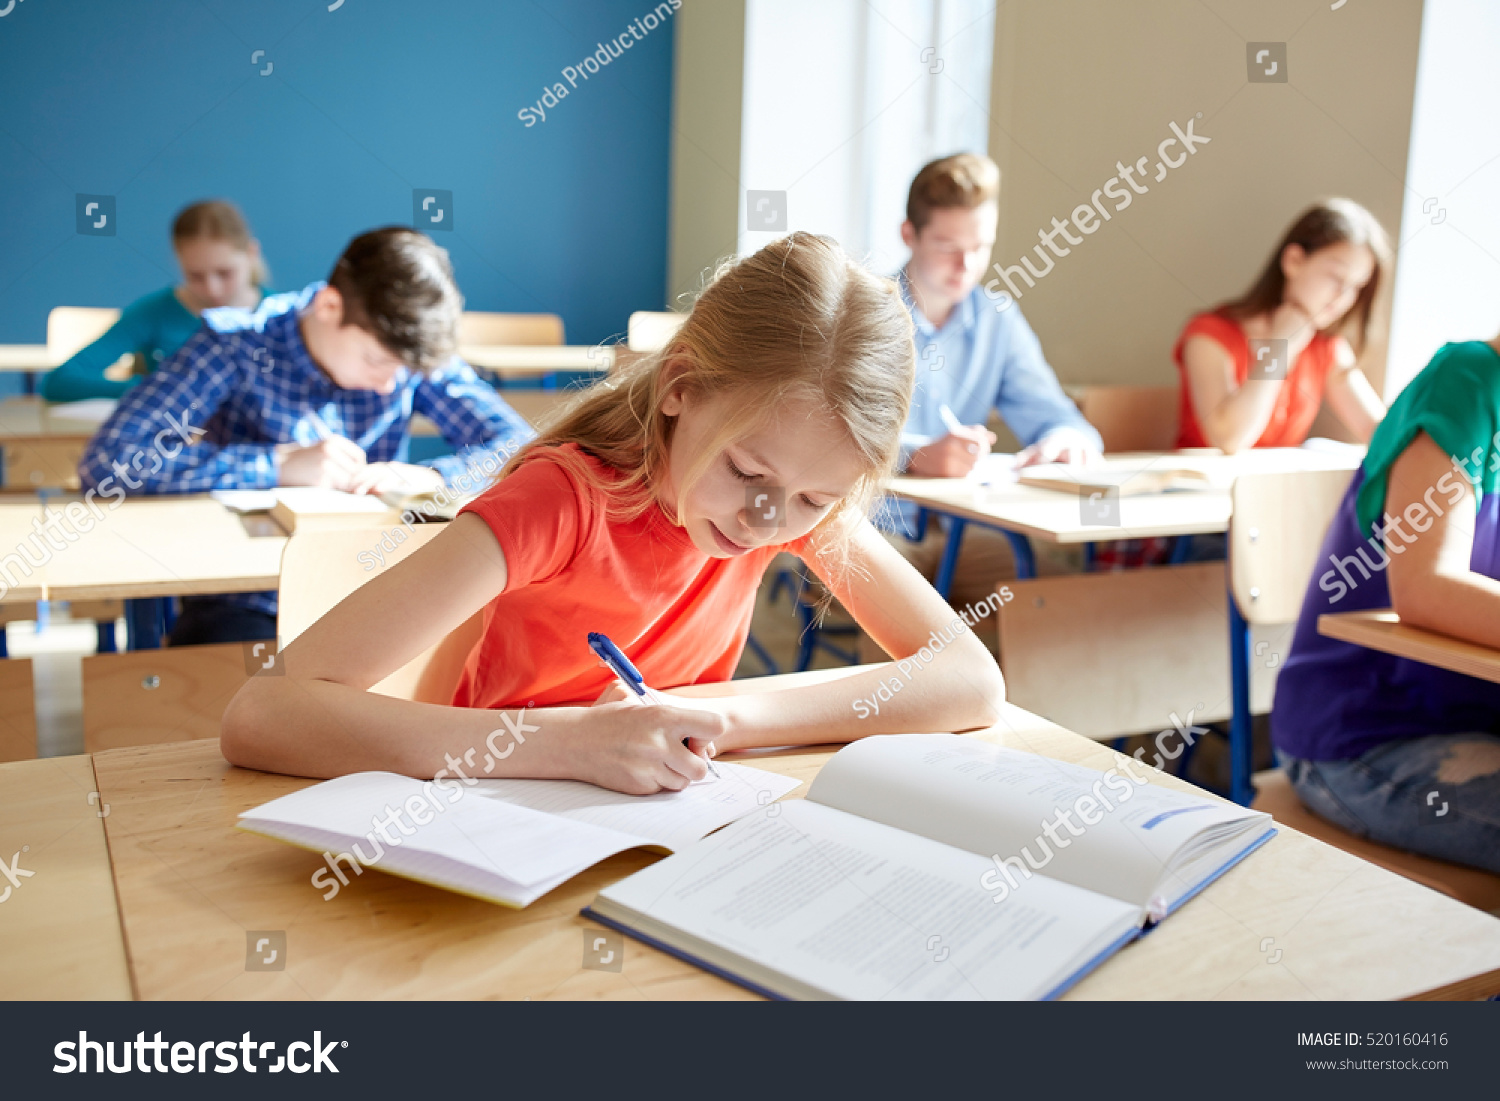 education, learning and people concept - student girl with book writing school test #520160416